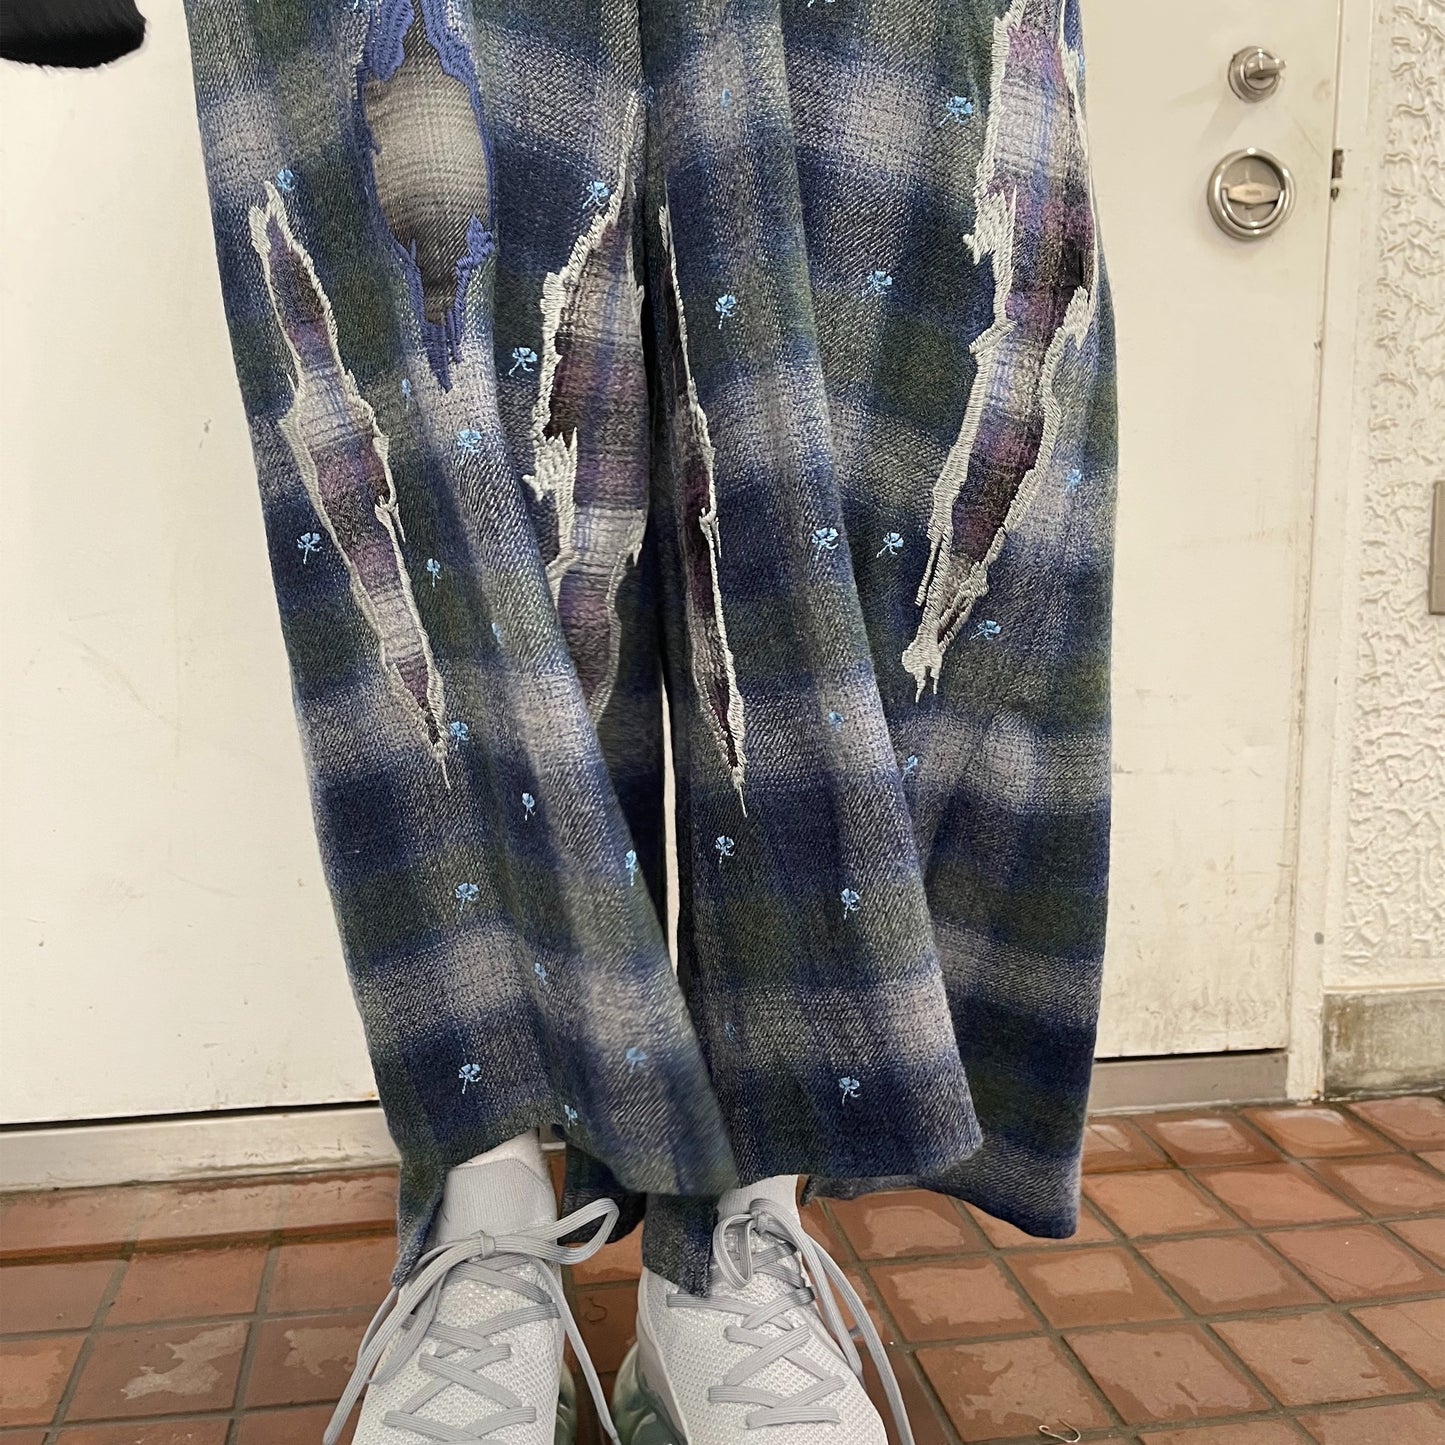 MIKIOSAKABE / WALL PAPER WIDE PANTS / BLUE CHECK / 刺繍